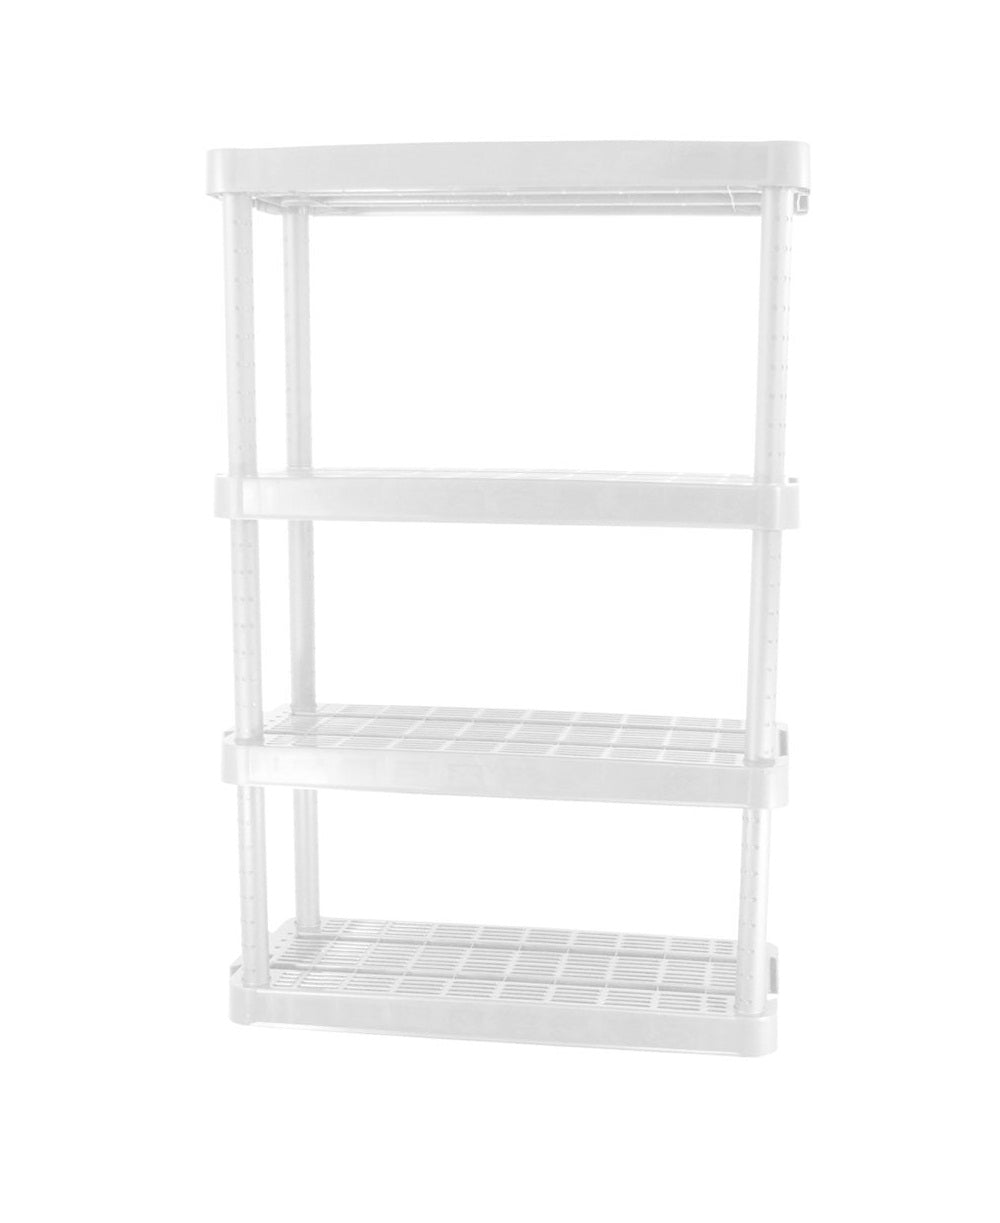 buy garage ventilated shelving units at cheap rate in bulk. wholesale & retail storage & organizers items store.